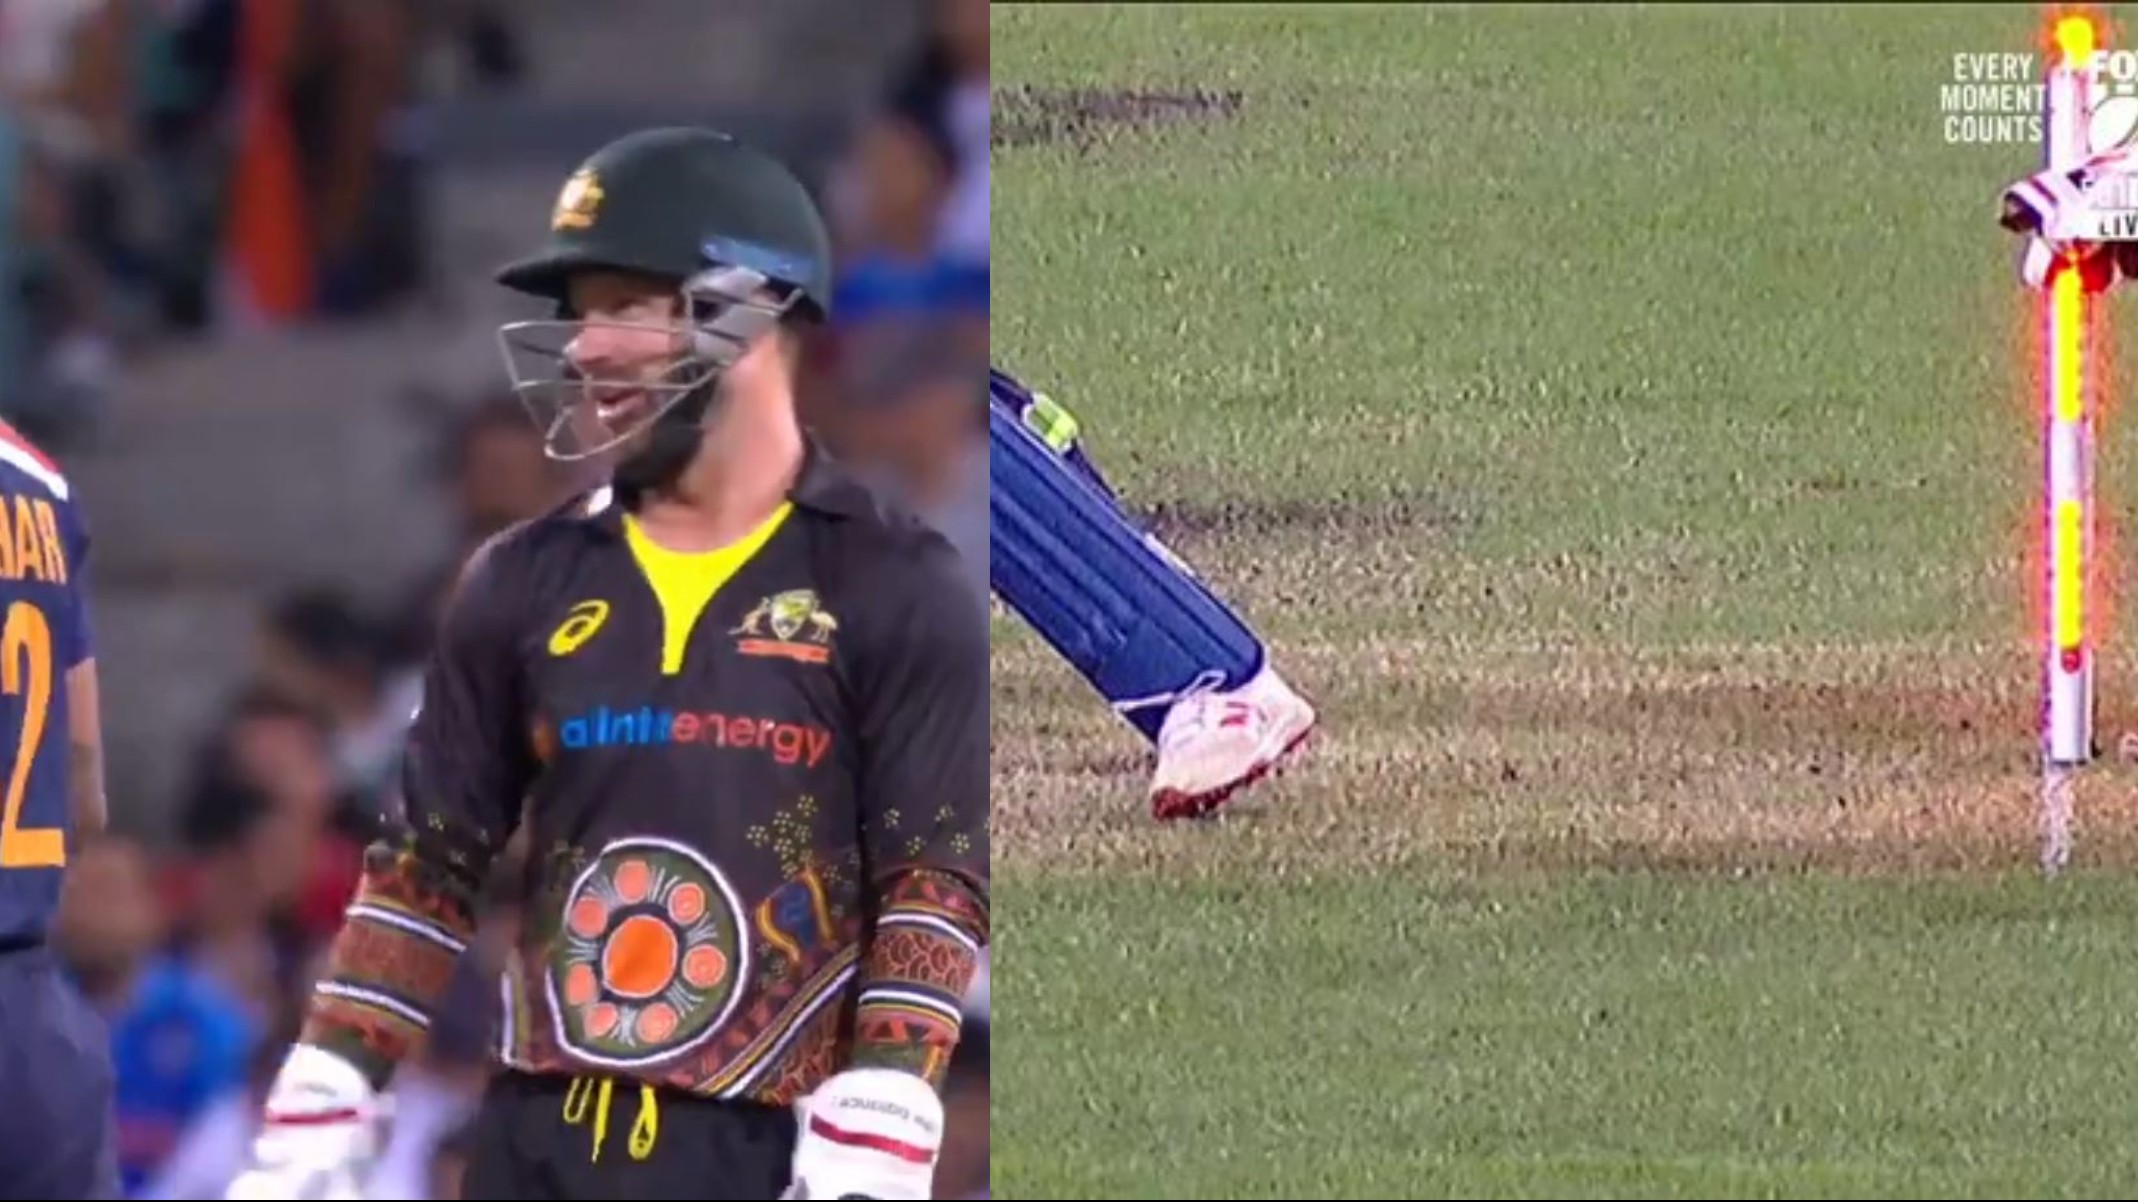 AUS v IND 2020-21: WATCH- “Not quick like Dhoni,” Wade tells Dhawan after close stumping call